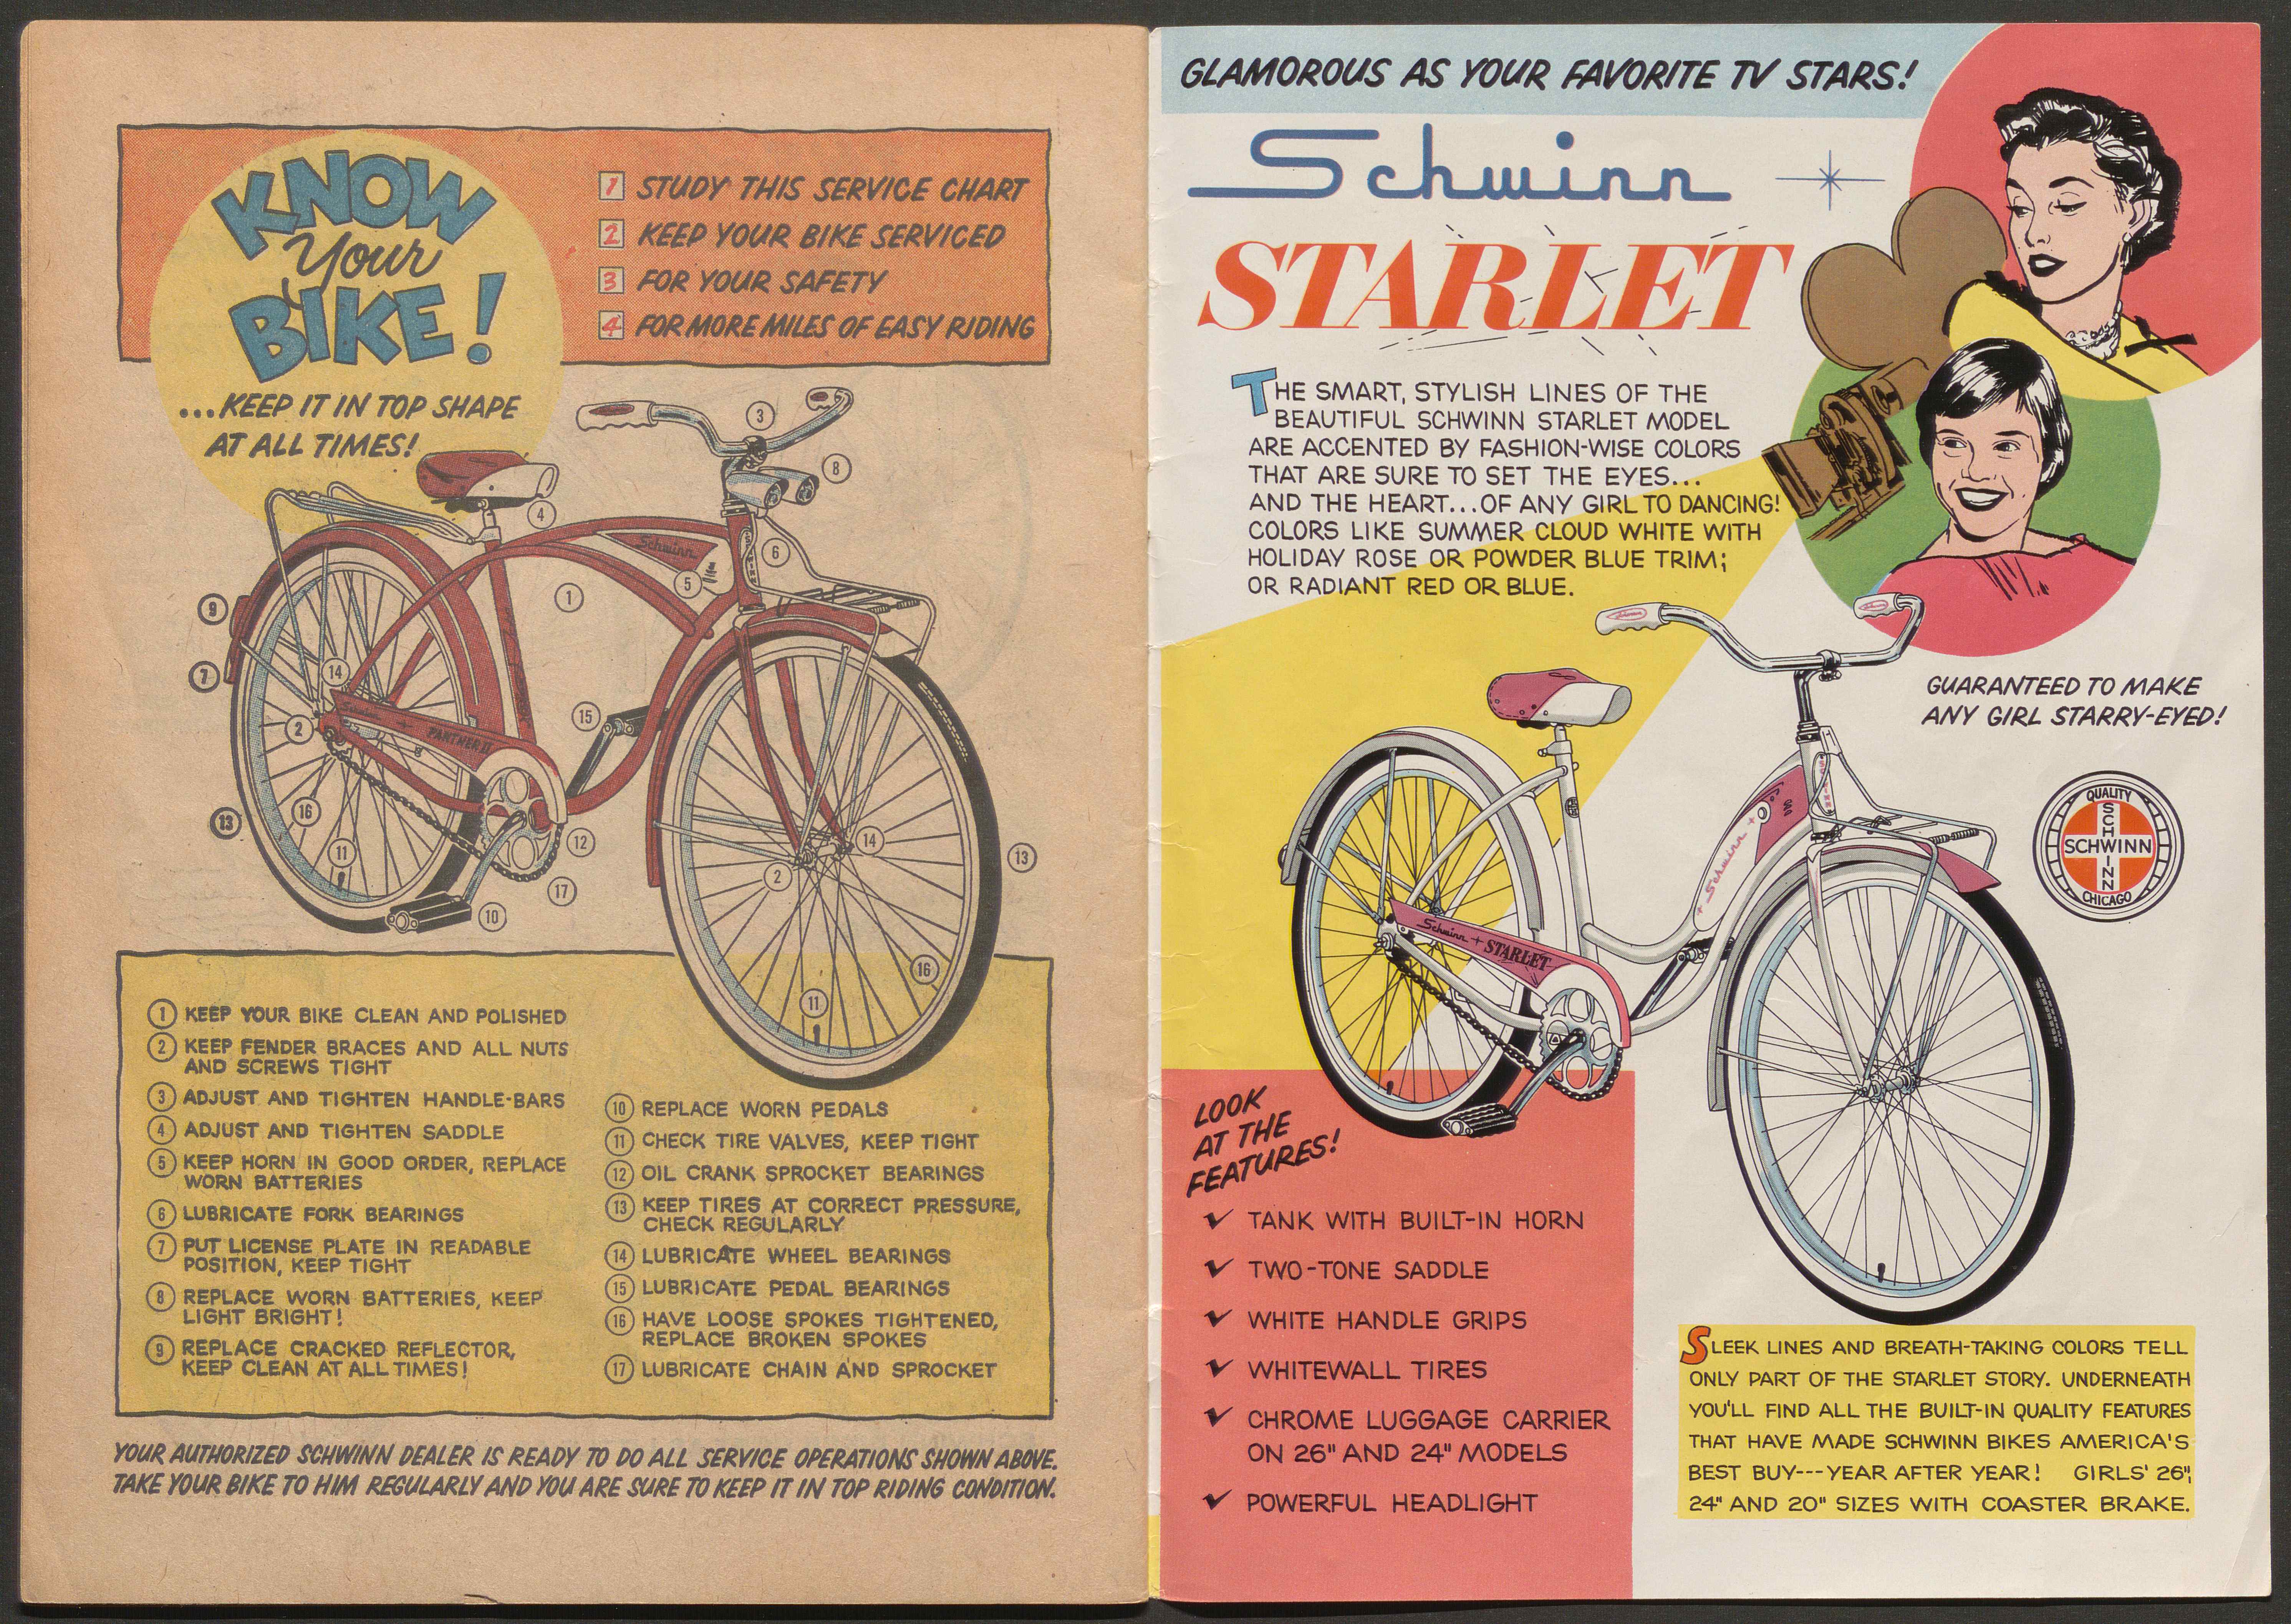 Pages from a comic-book style bike catalog showing a bike diagram and ad forthe Shwinn Starlet bike.